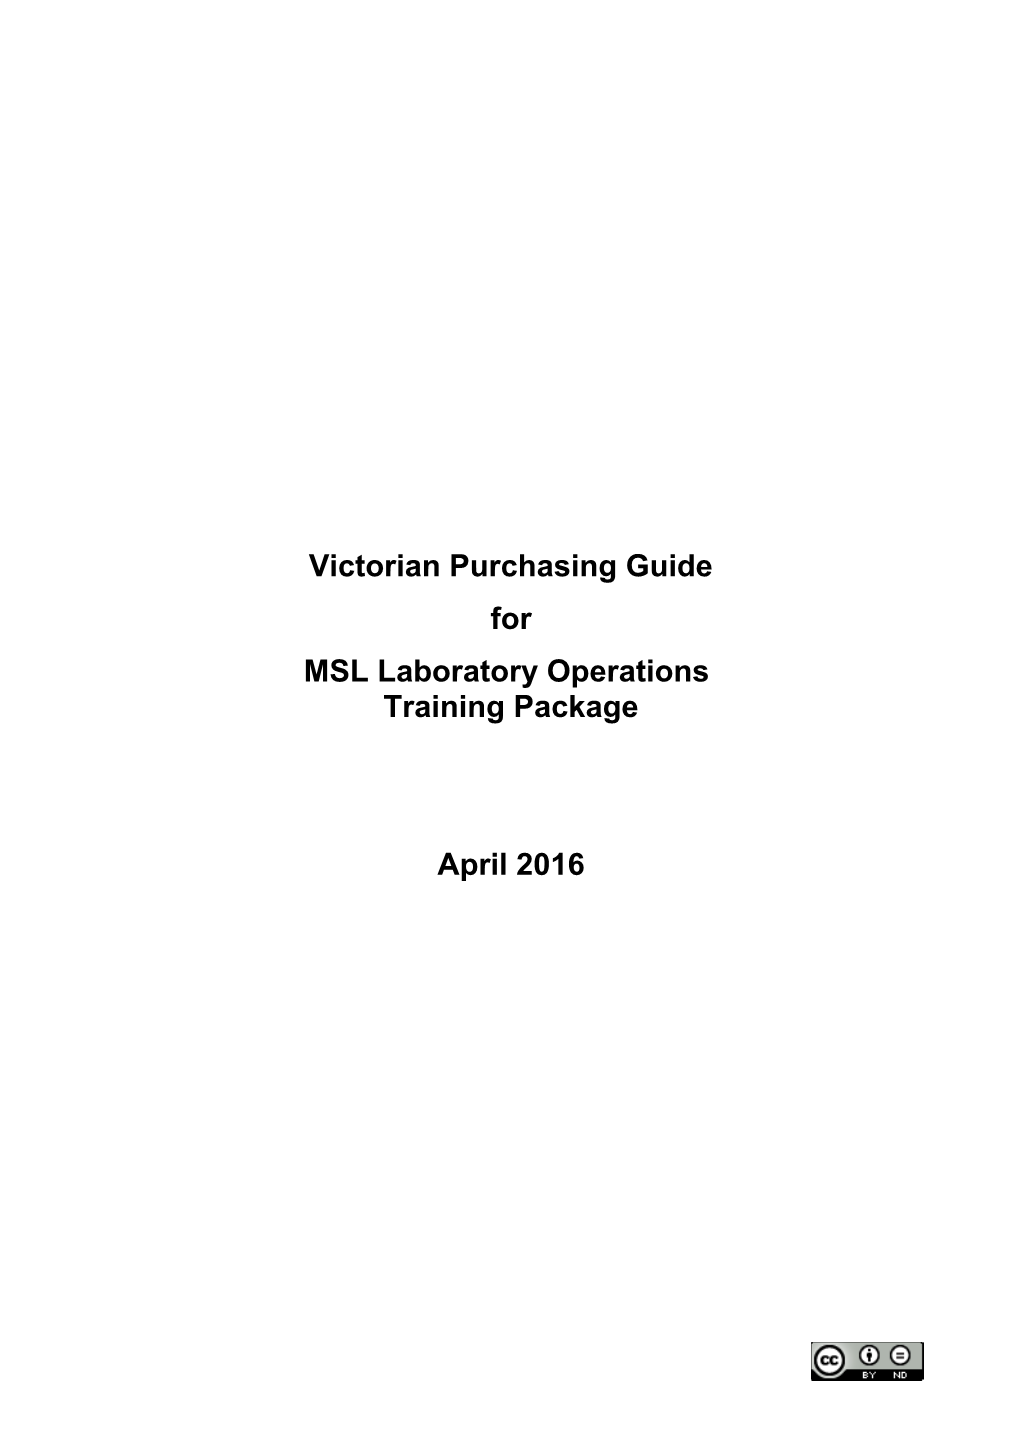 Victorian Purchasing Guide for MSL Laboratory Operations